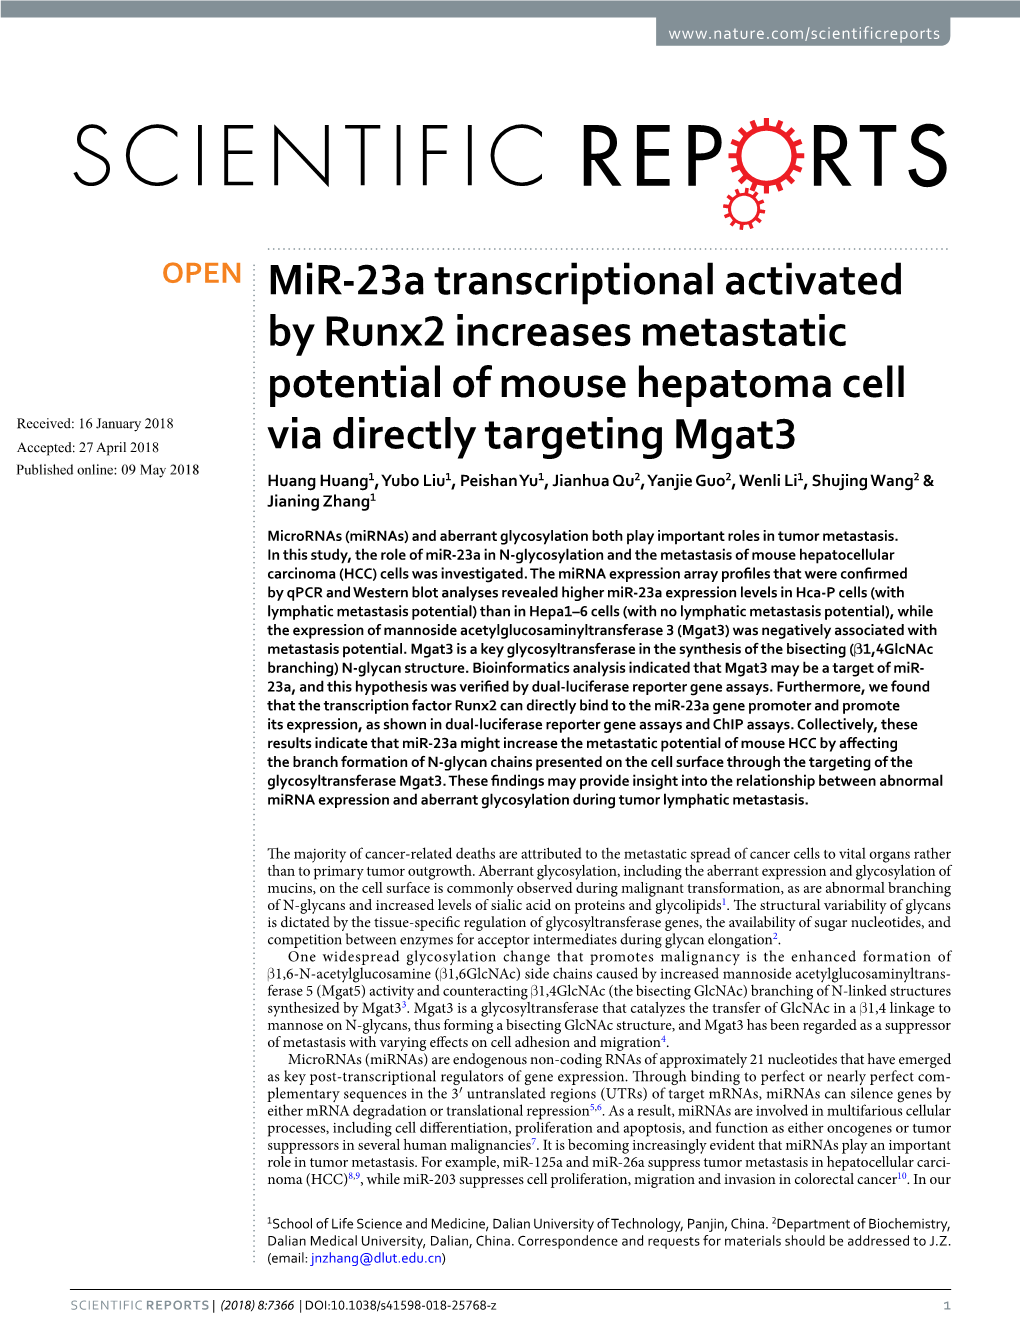 Mir-23A Transcriptional Activated by Runx2 Increases Metastatic